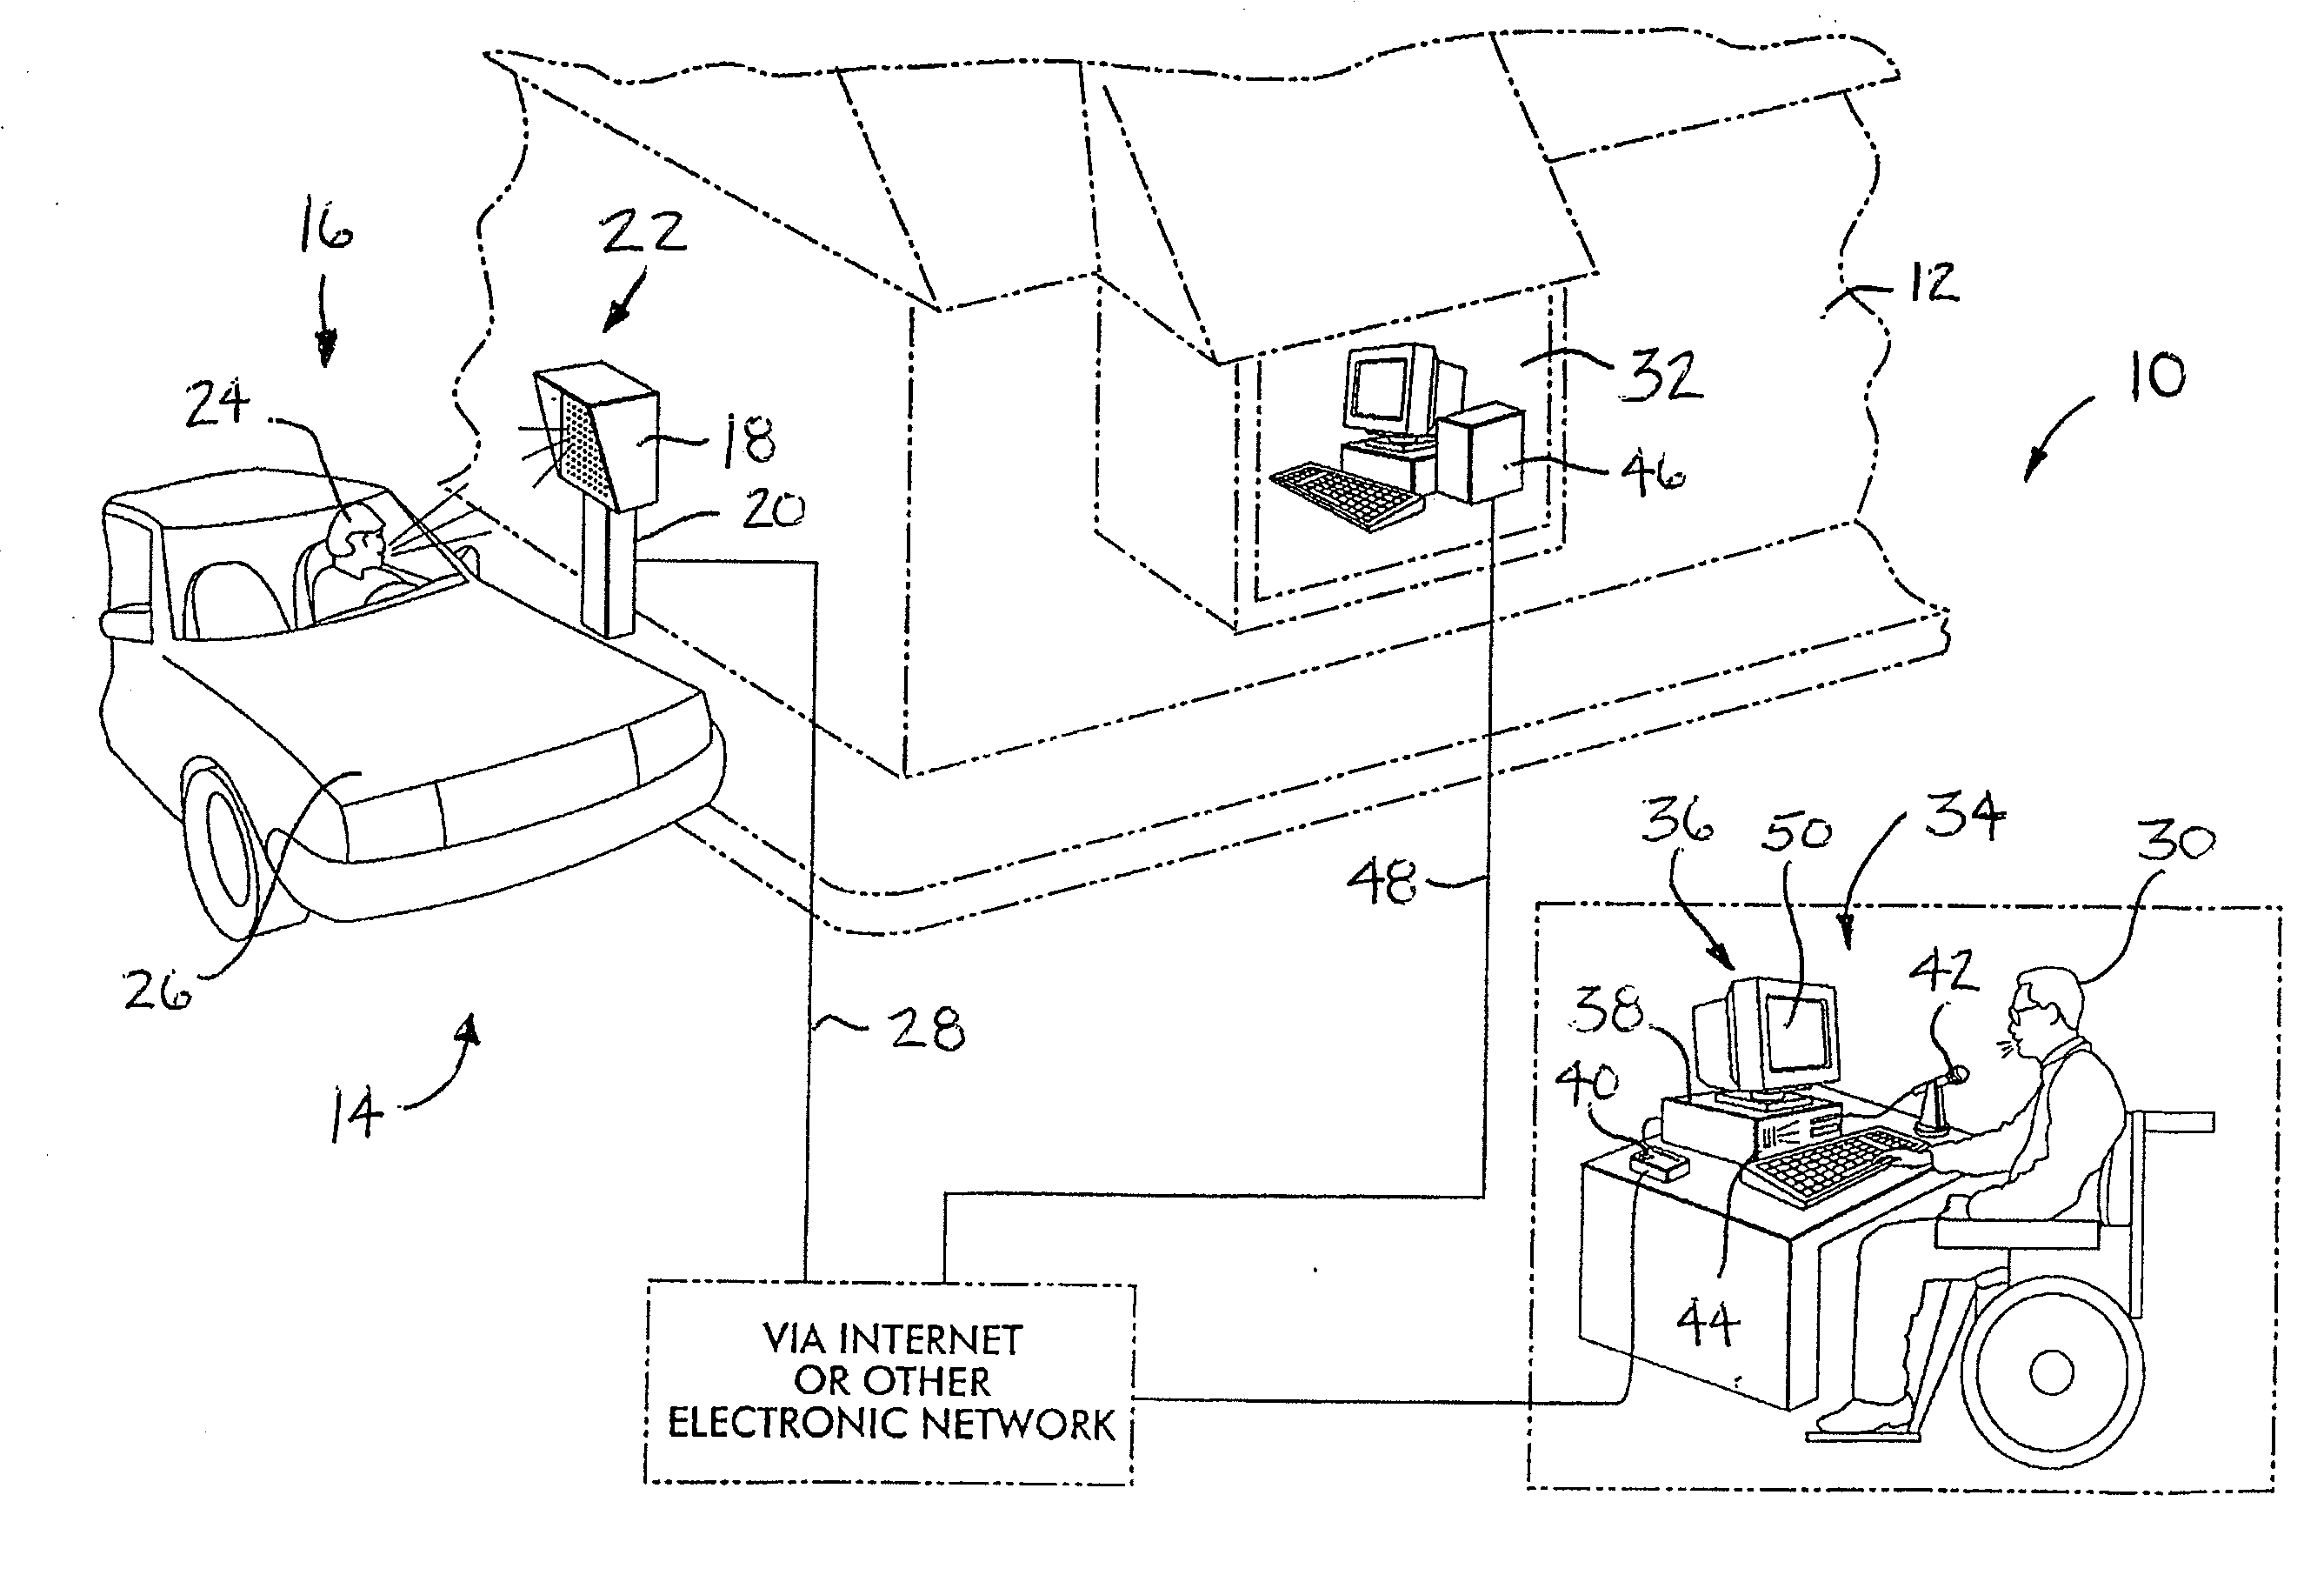 Method and system for entering orders of customers